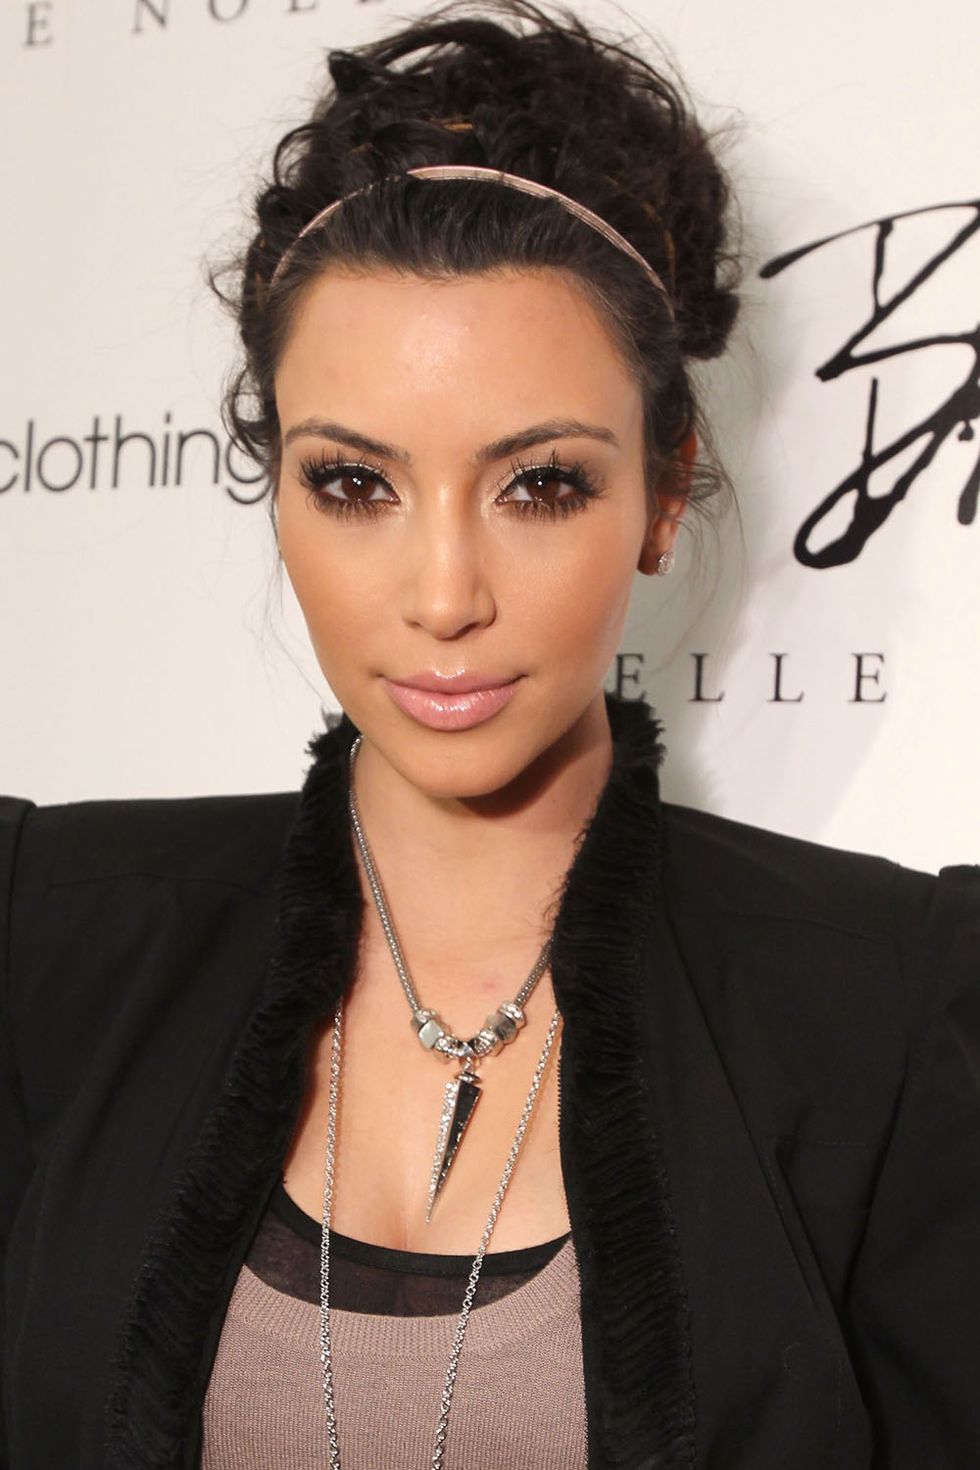 WEST HOLLYWOOD, CA - FEBRUARY 03:  Kim Kardashian at her Official Jewelry Launch Event  "Belle Noel" by GLAMHOUSE, a Pascal Mouawad Company, held at  REVOLVEclothing on February 3, 2011 in West Hollywood, California.  (Photo by Alexandra Wyman/WireImage) *** Local Caption *** Kim Kardashian